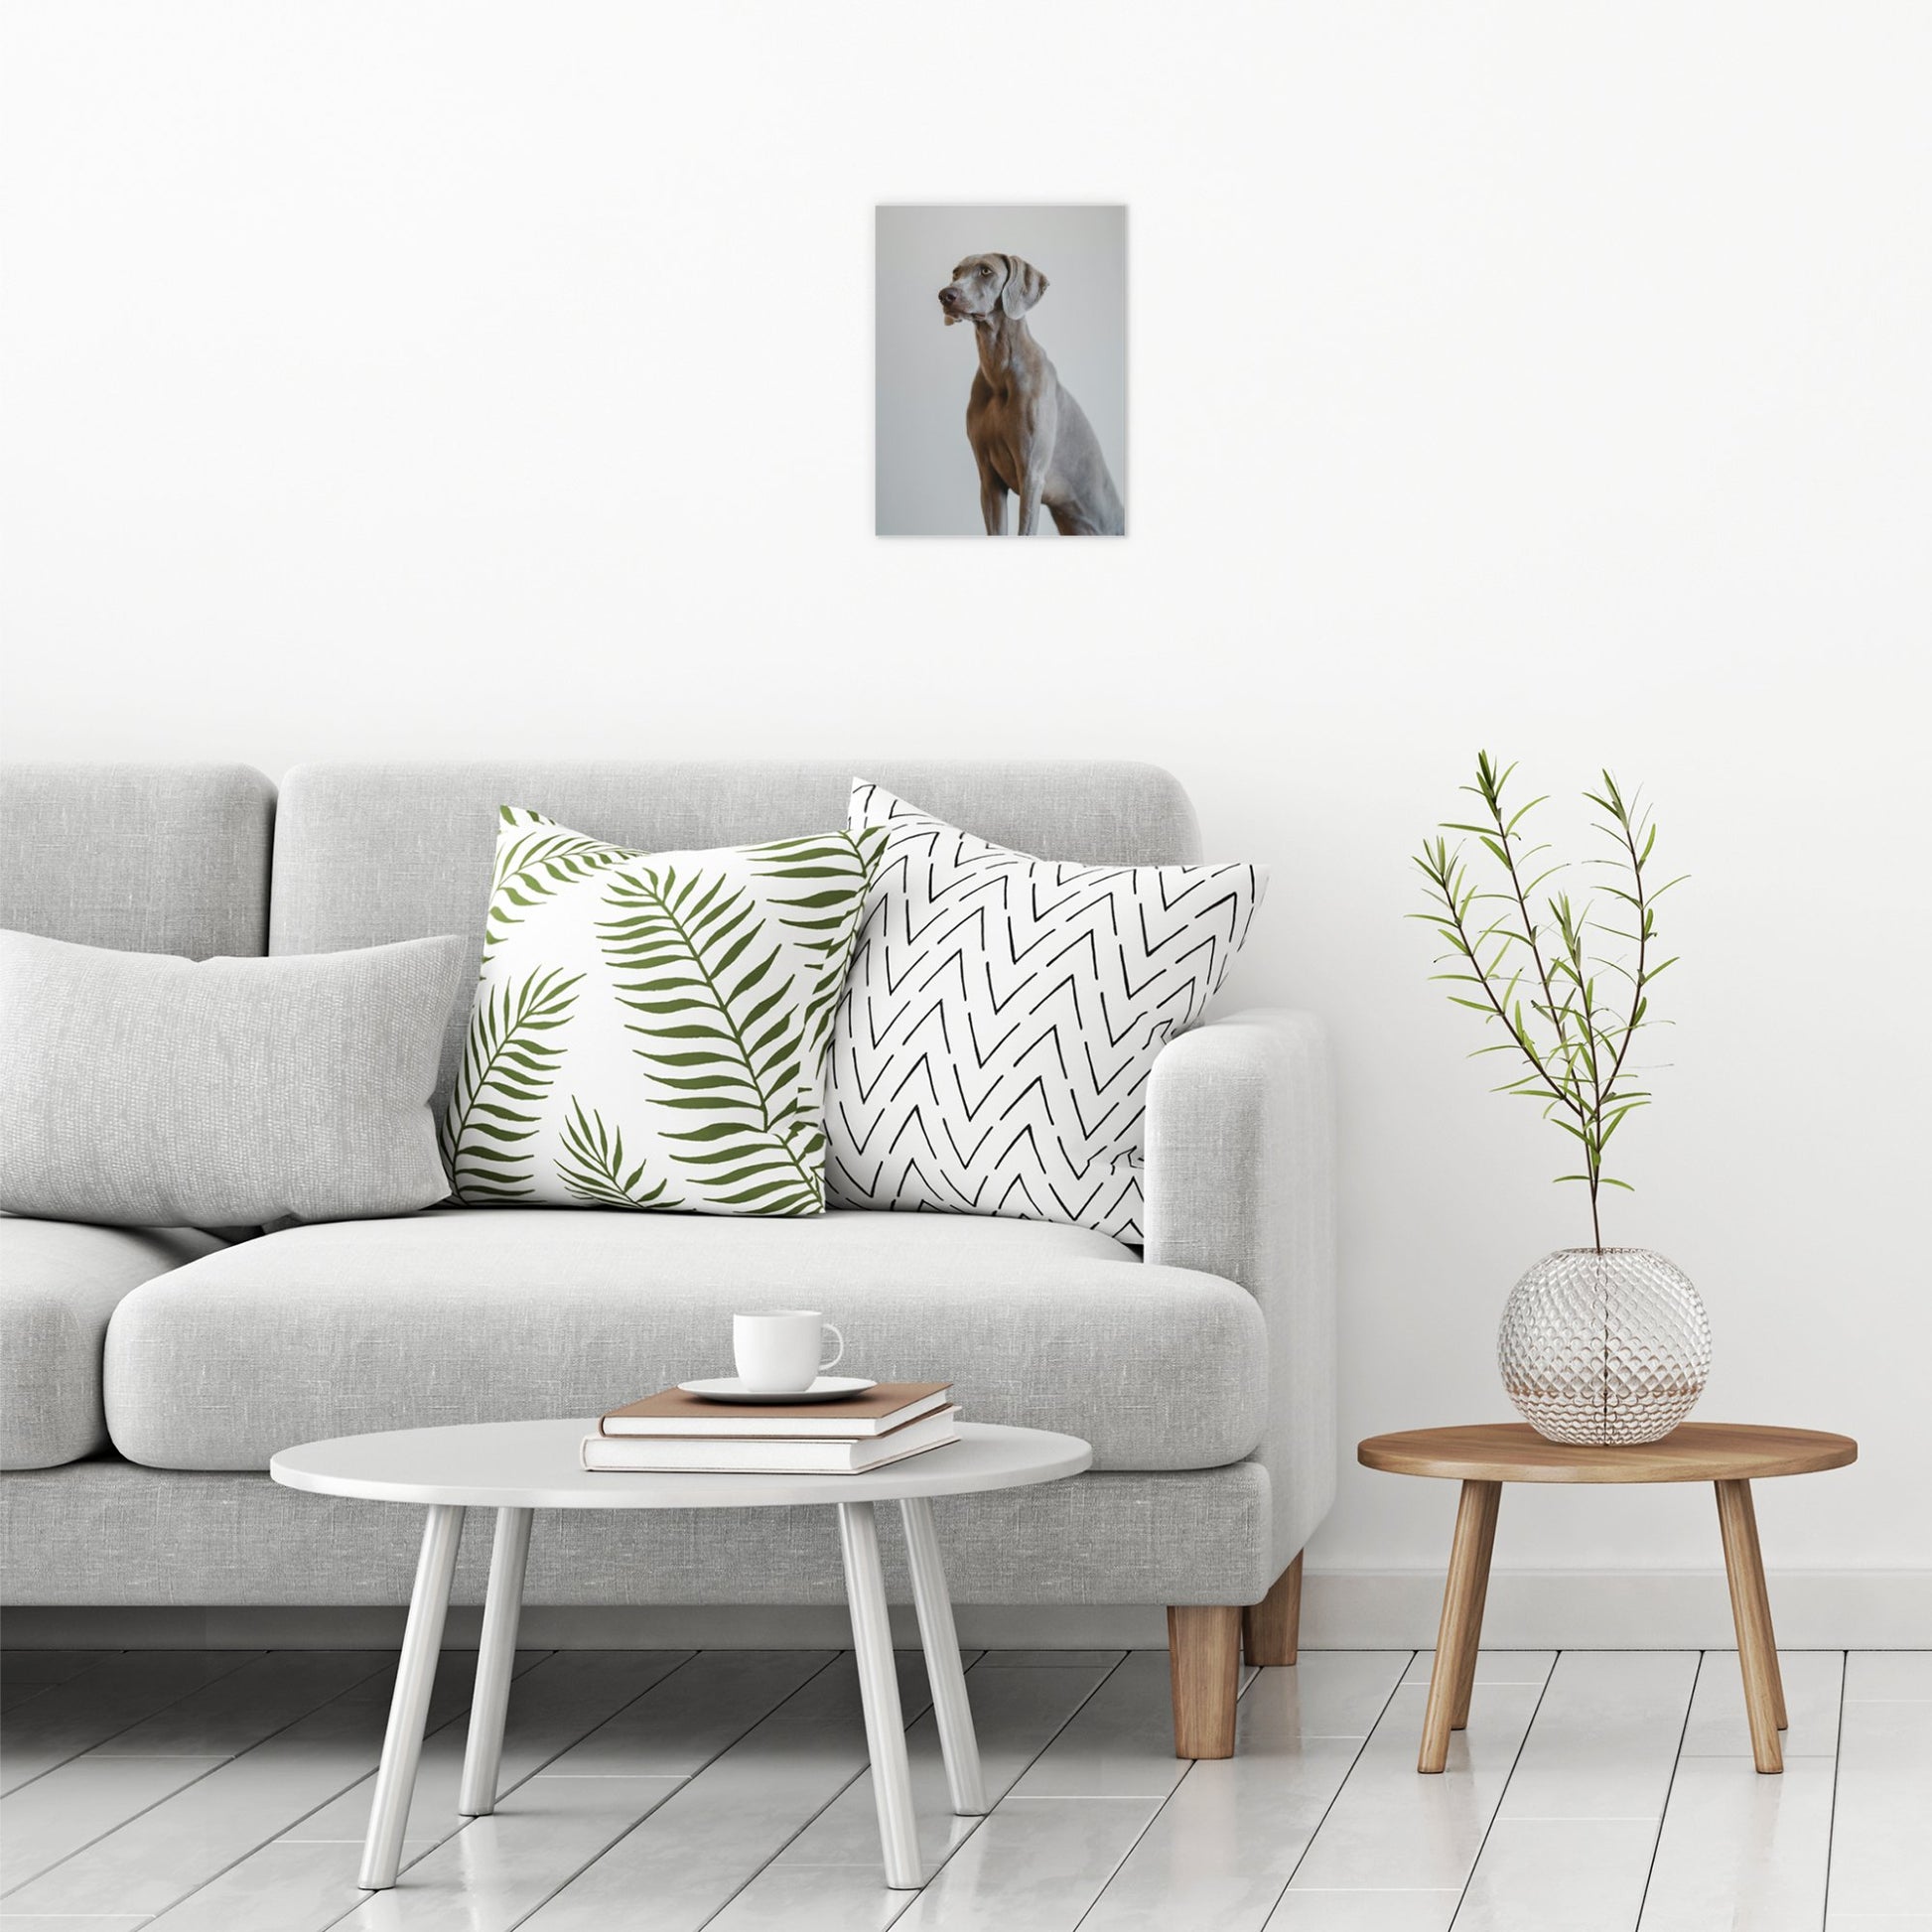 A contemporary modern room view showing a small size metal art poster display plate with printed design of a Weimaraner